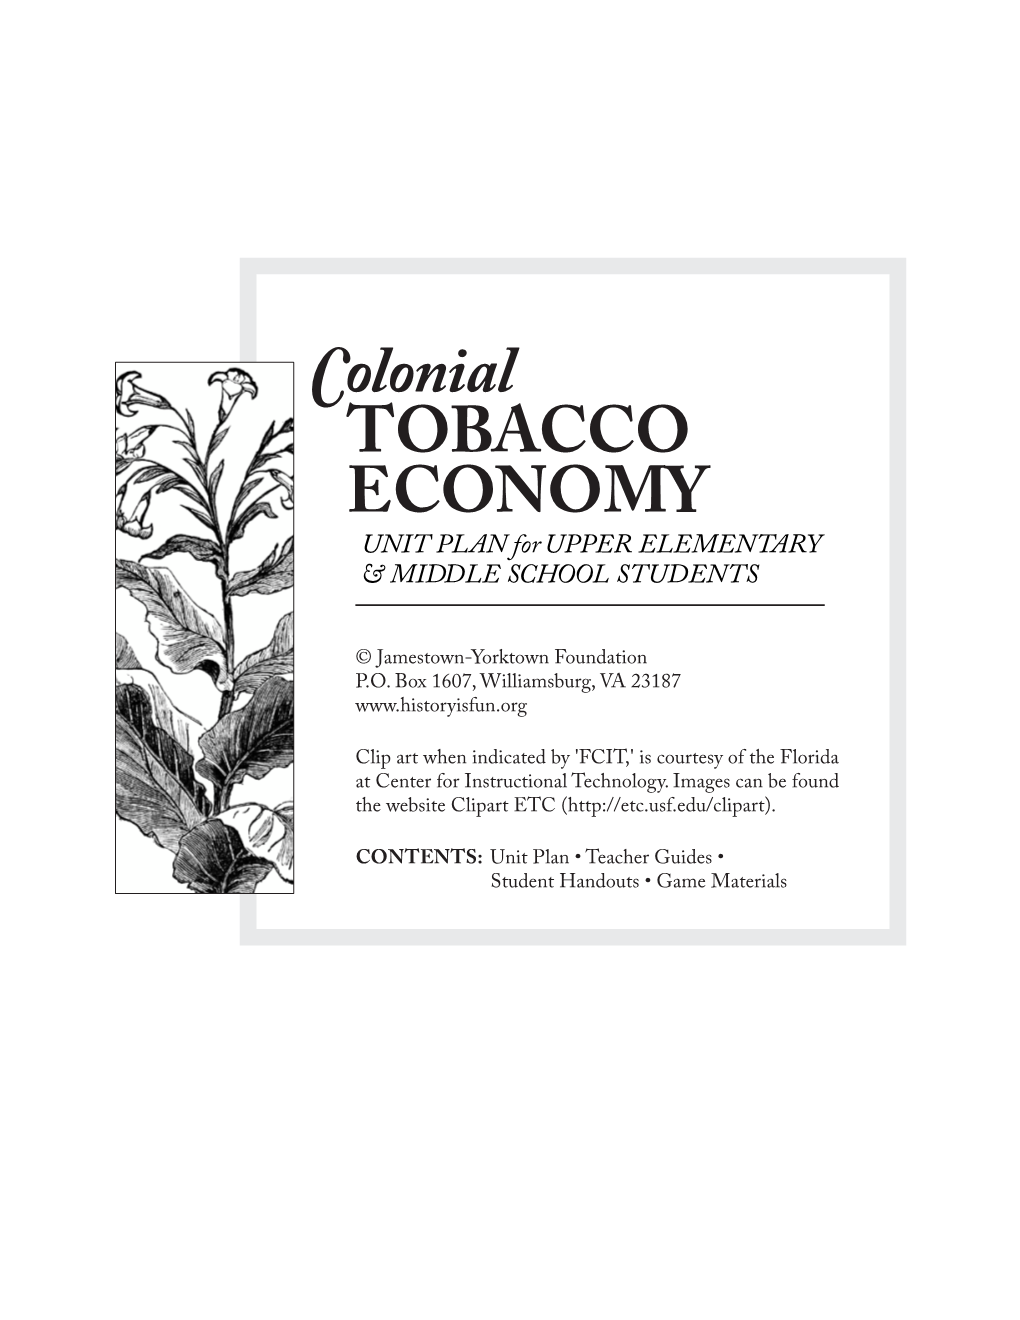 Colonial TOBACCO ECONOMY UNIT PLAN for UPPER ELEMENTARY & MIDDLE SCHOOL STUDENTS